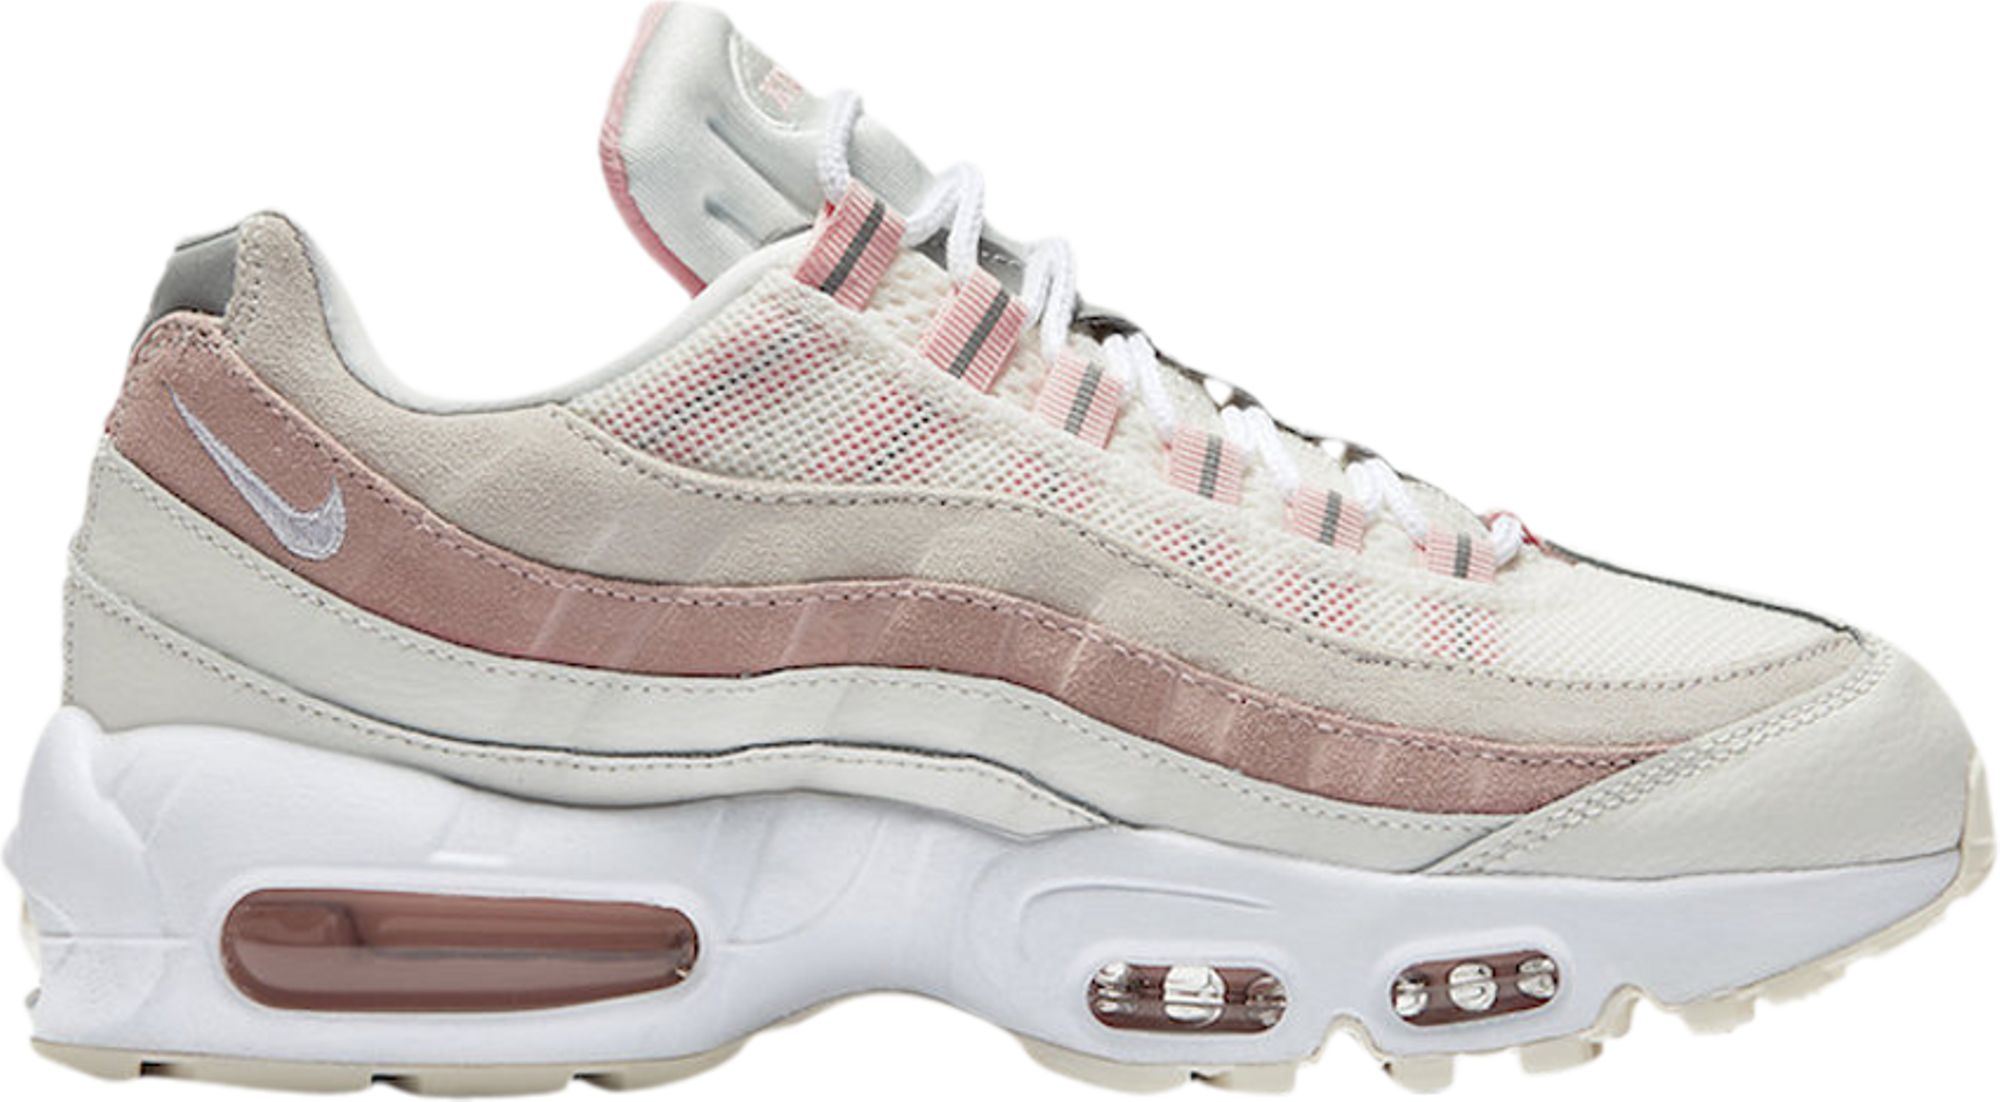 Buy Wmns Air Max 95 Bleached Coral 307960 116 Goat